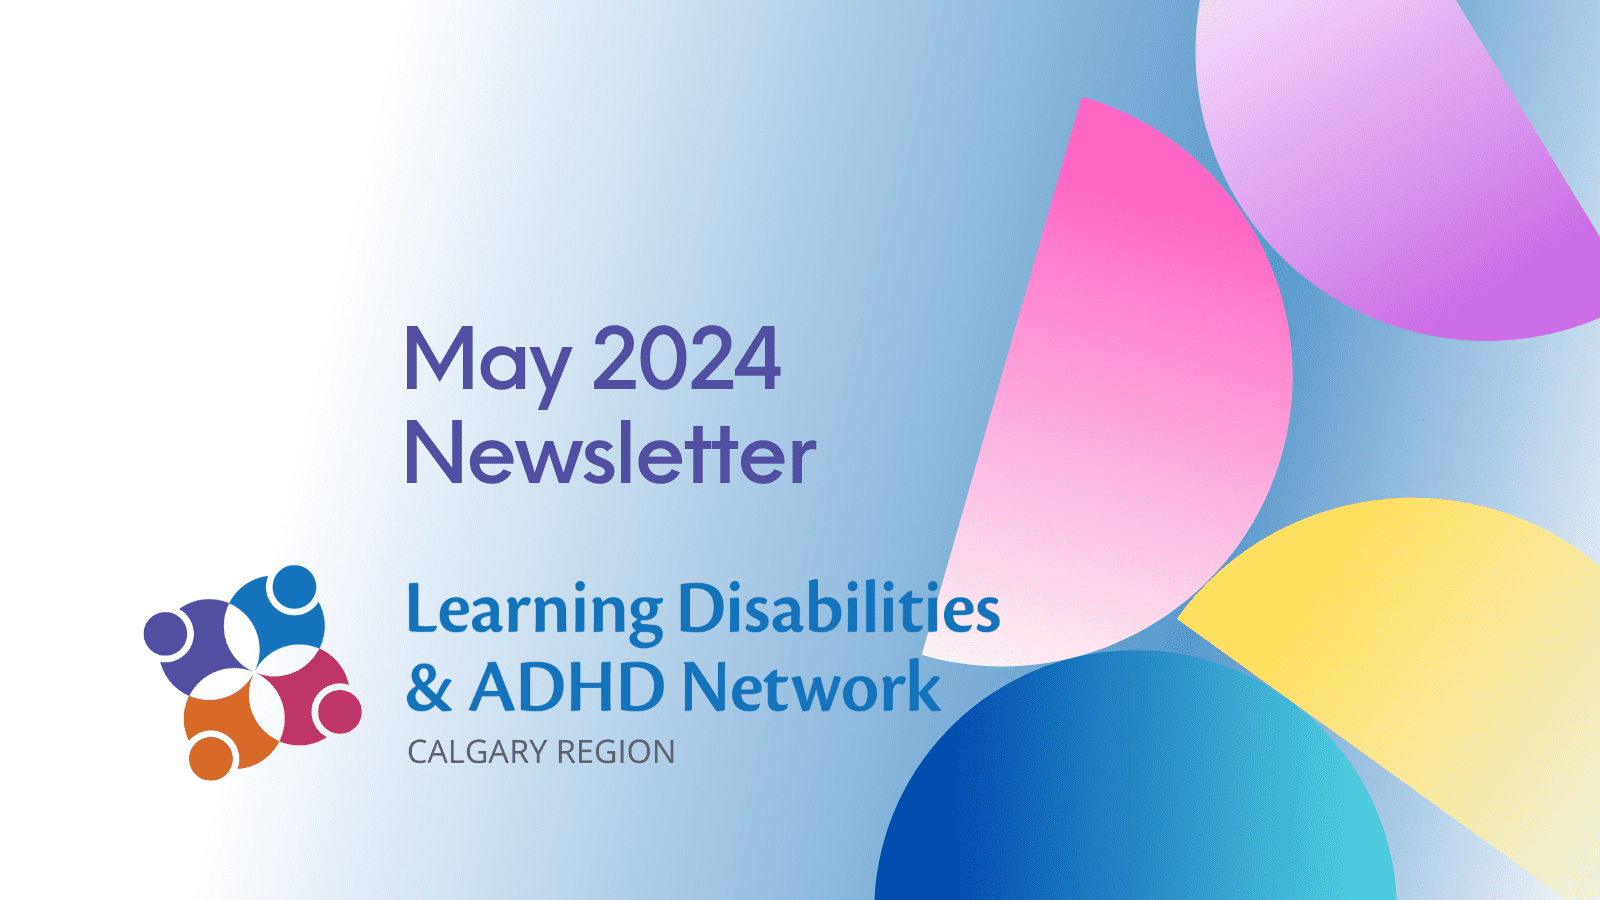 May 2024 Newsletter title with colourful semicircles